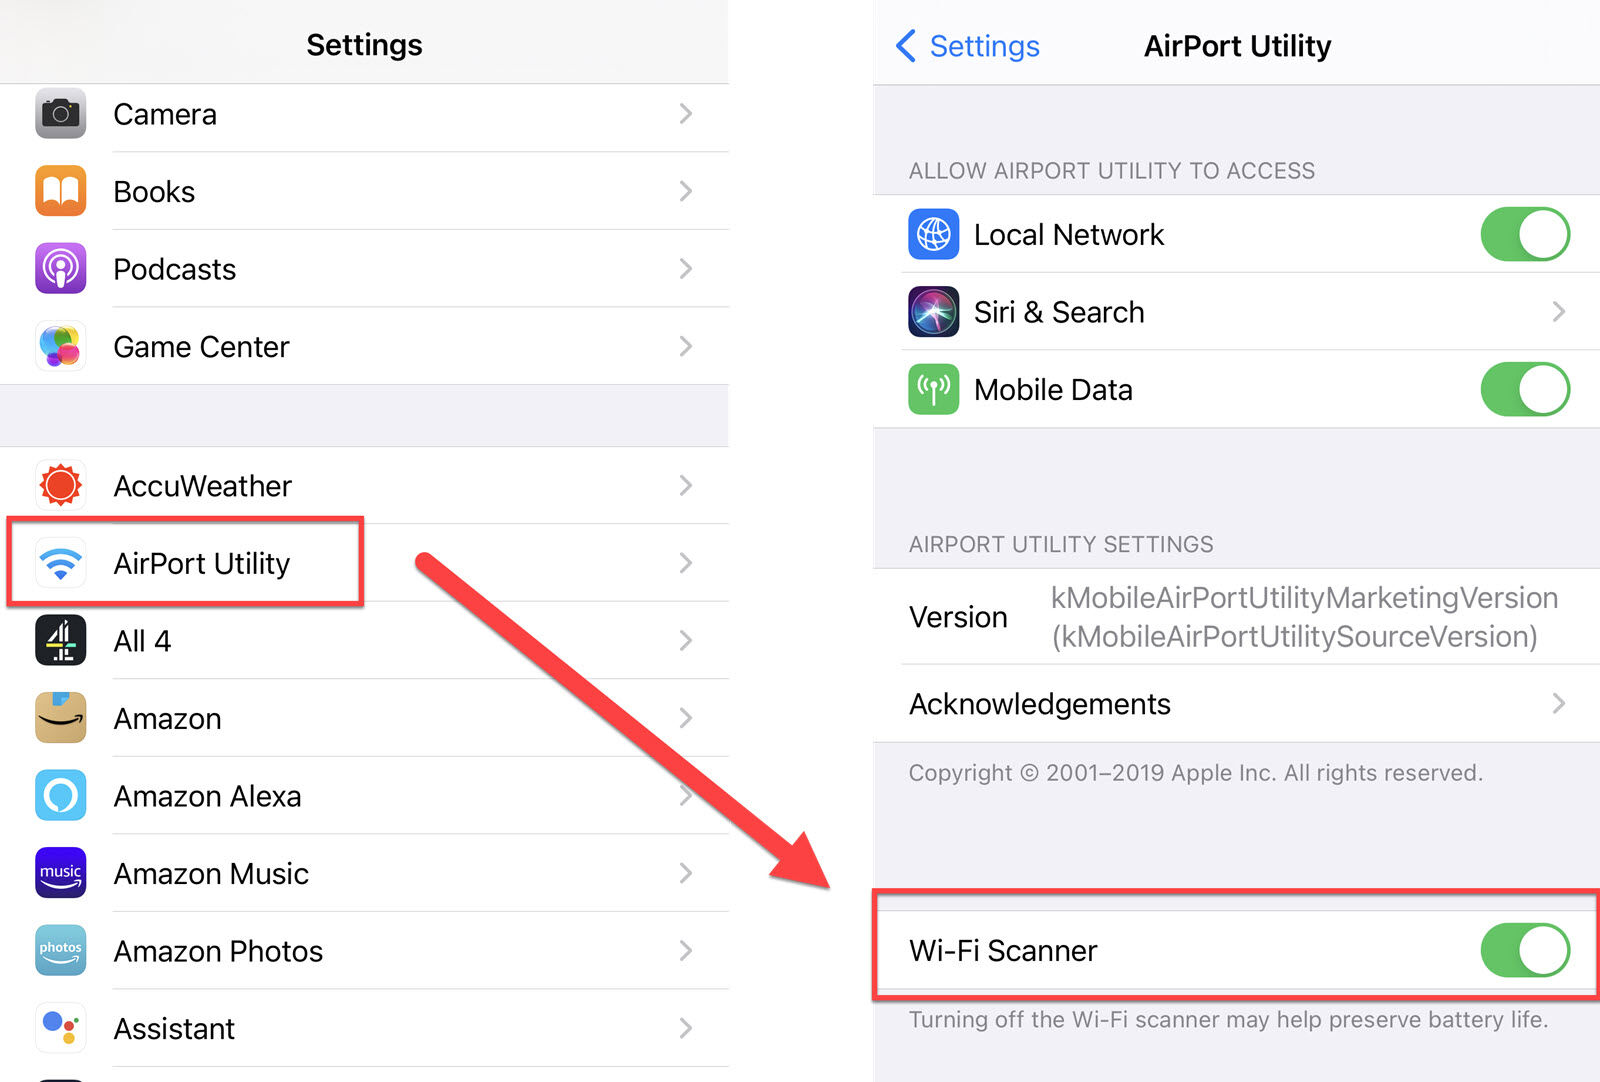 Make sure that you have a stable internet connection
Check your Wi-Fi signal strength